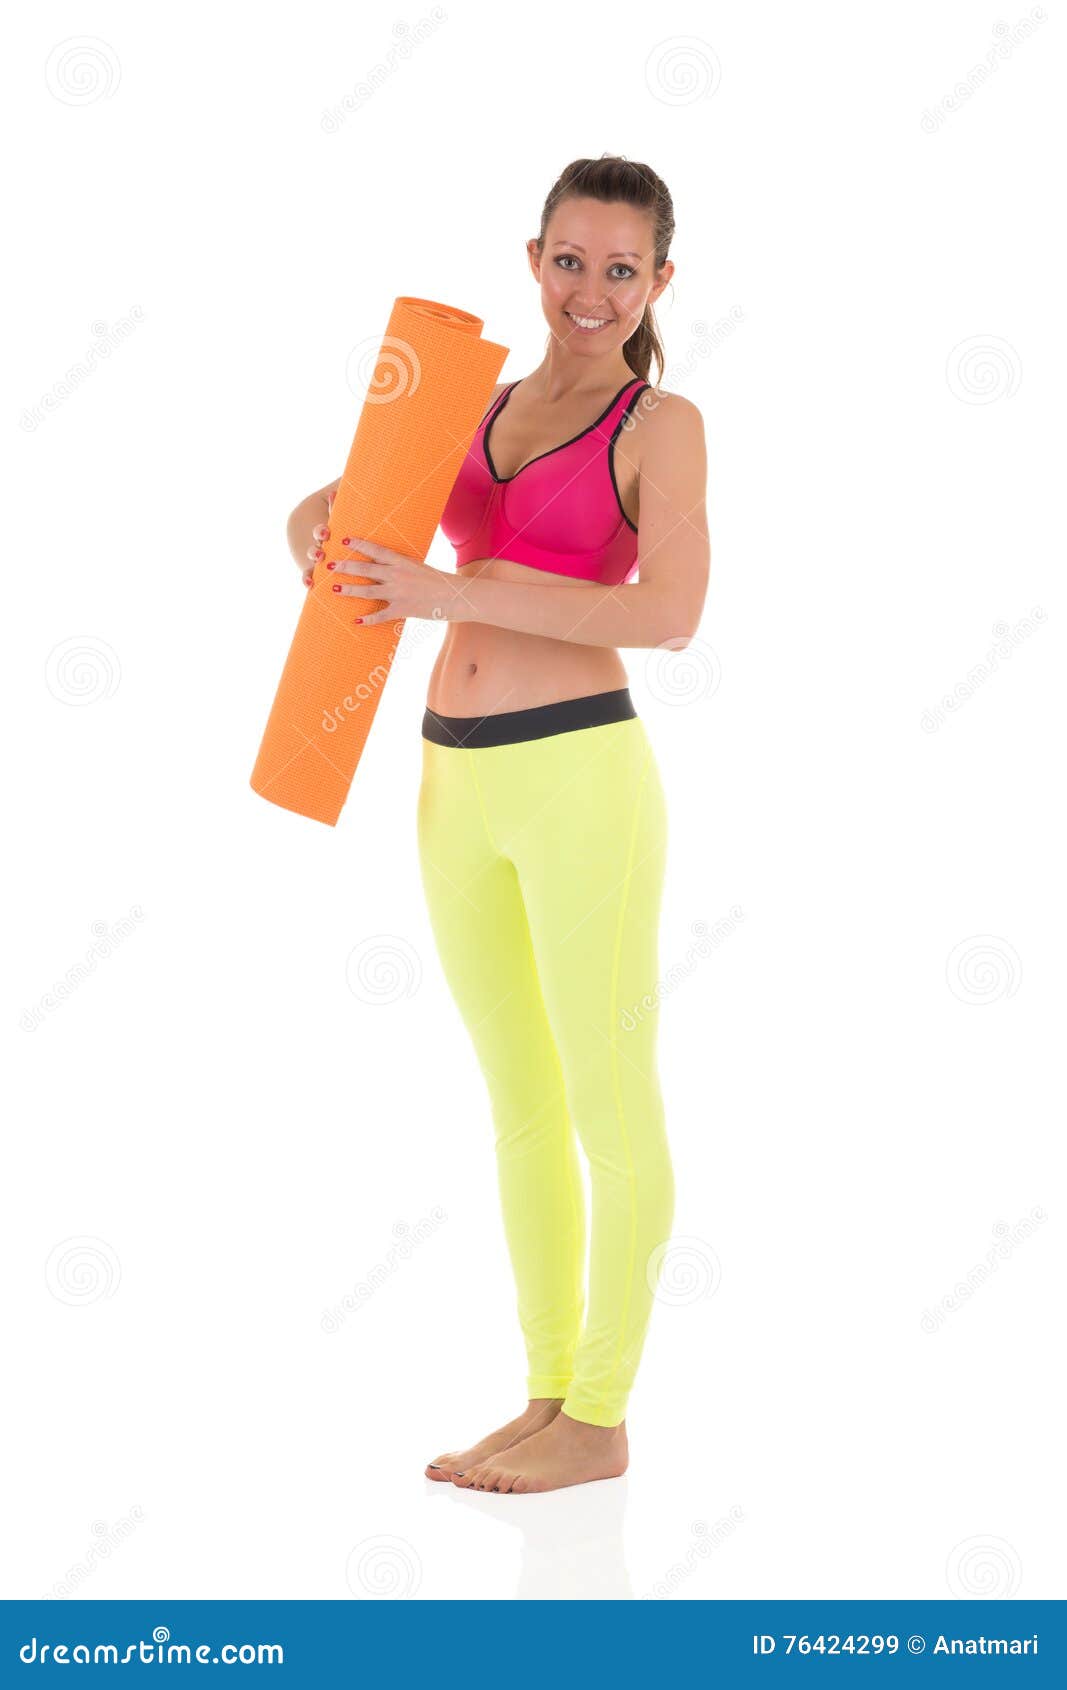 Smiling Brunette Woman In Sports Neon Yellow Leggings And Pink Bra Standing With The Orange